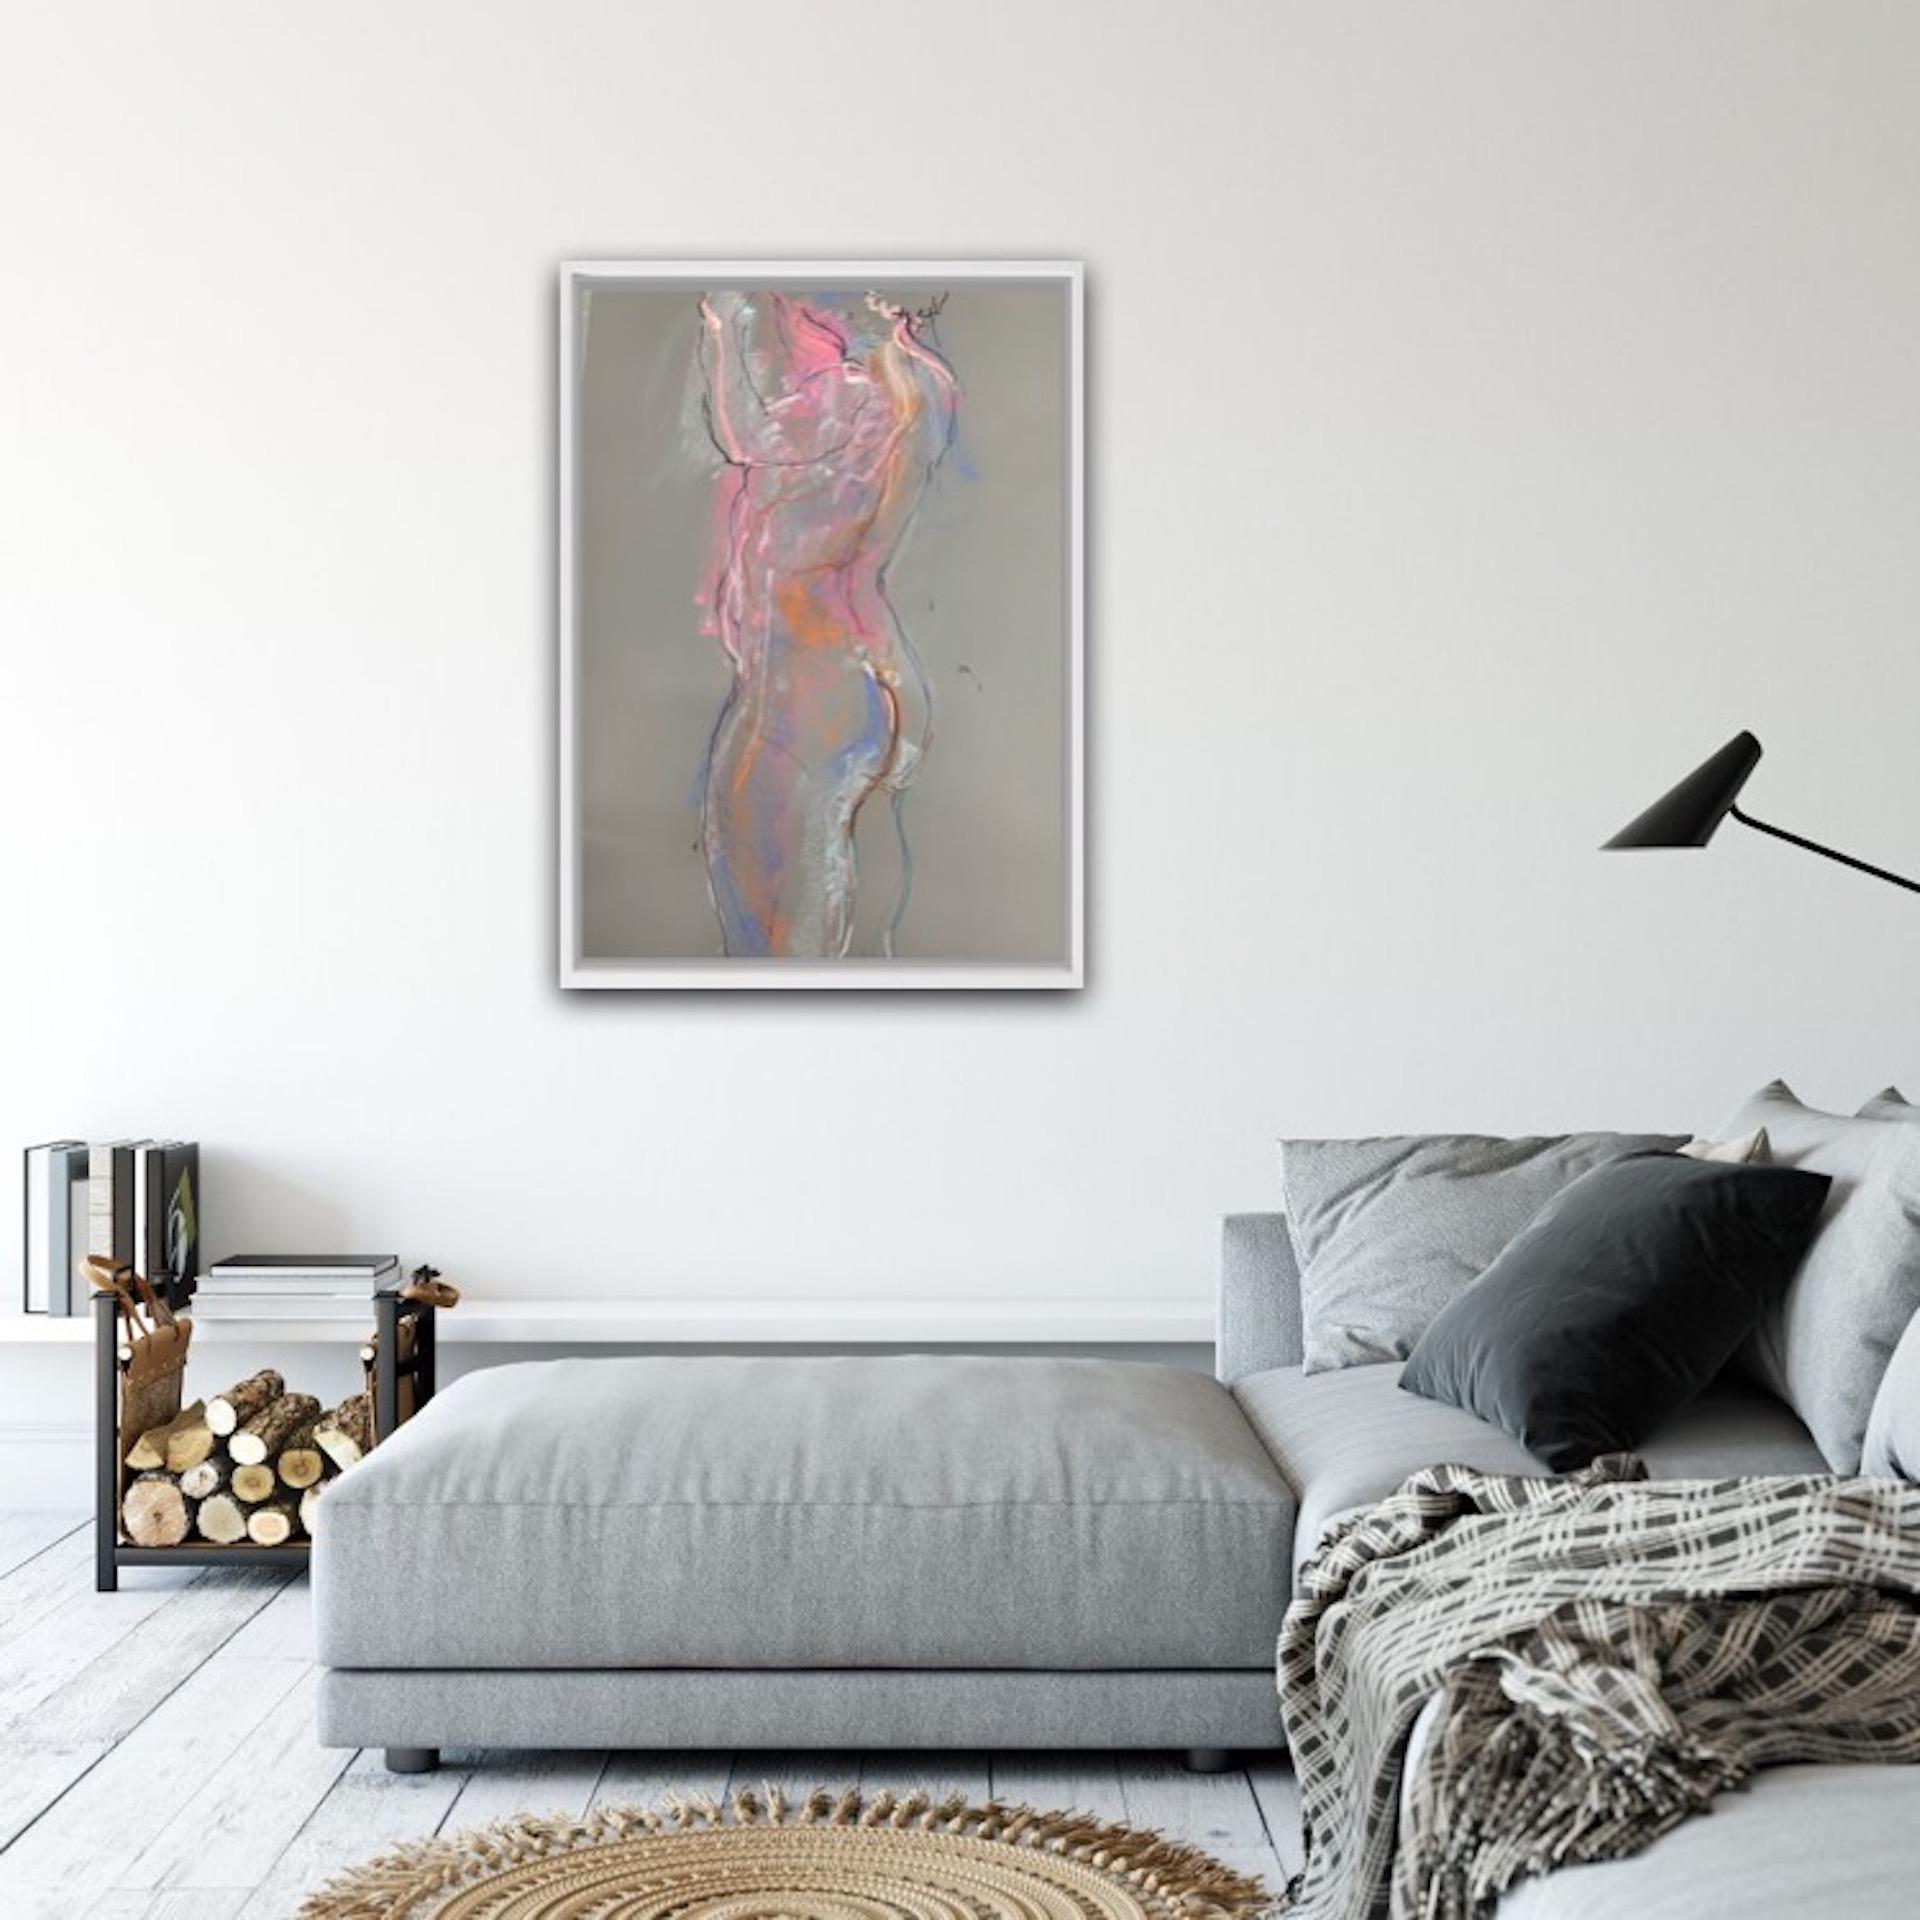 Judith Brenner
Alberto Standing 1
Original Figurative Painting
Mixed Media on Paper
Size: H 84.1cm x W 59.4cm x D 0.1cm
Sold Unframed
Please note that insitu images are purely an indication of how a piece may look.

Alberto Standing 1 is a